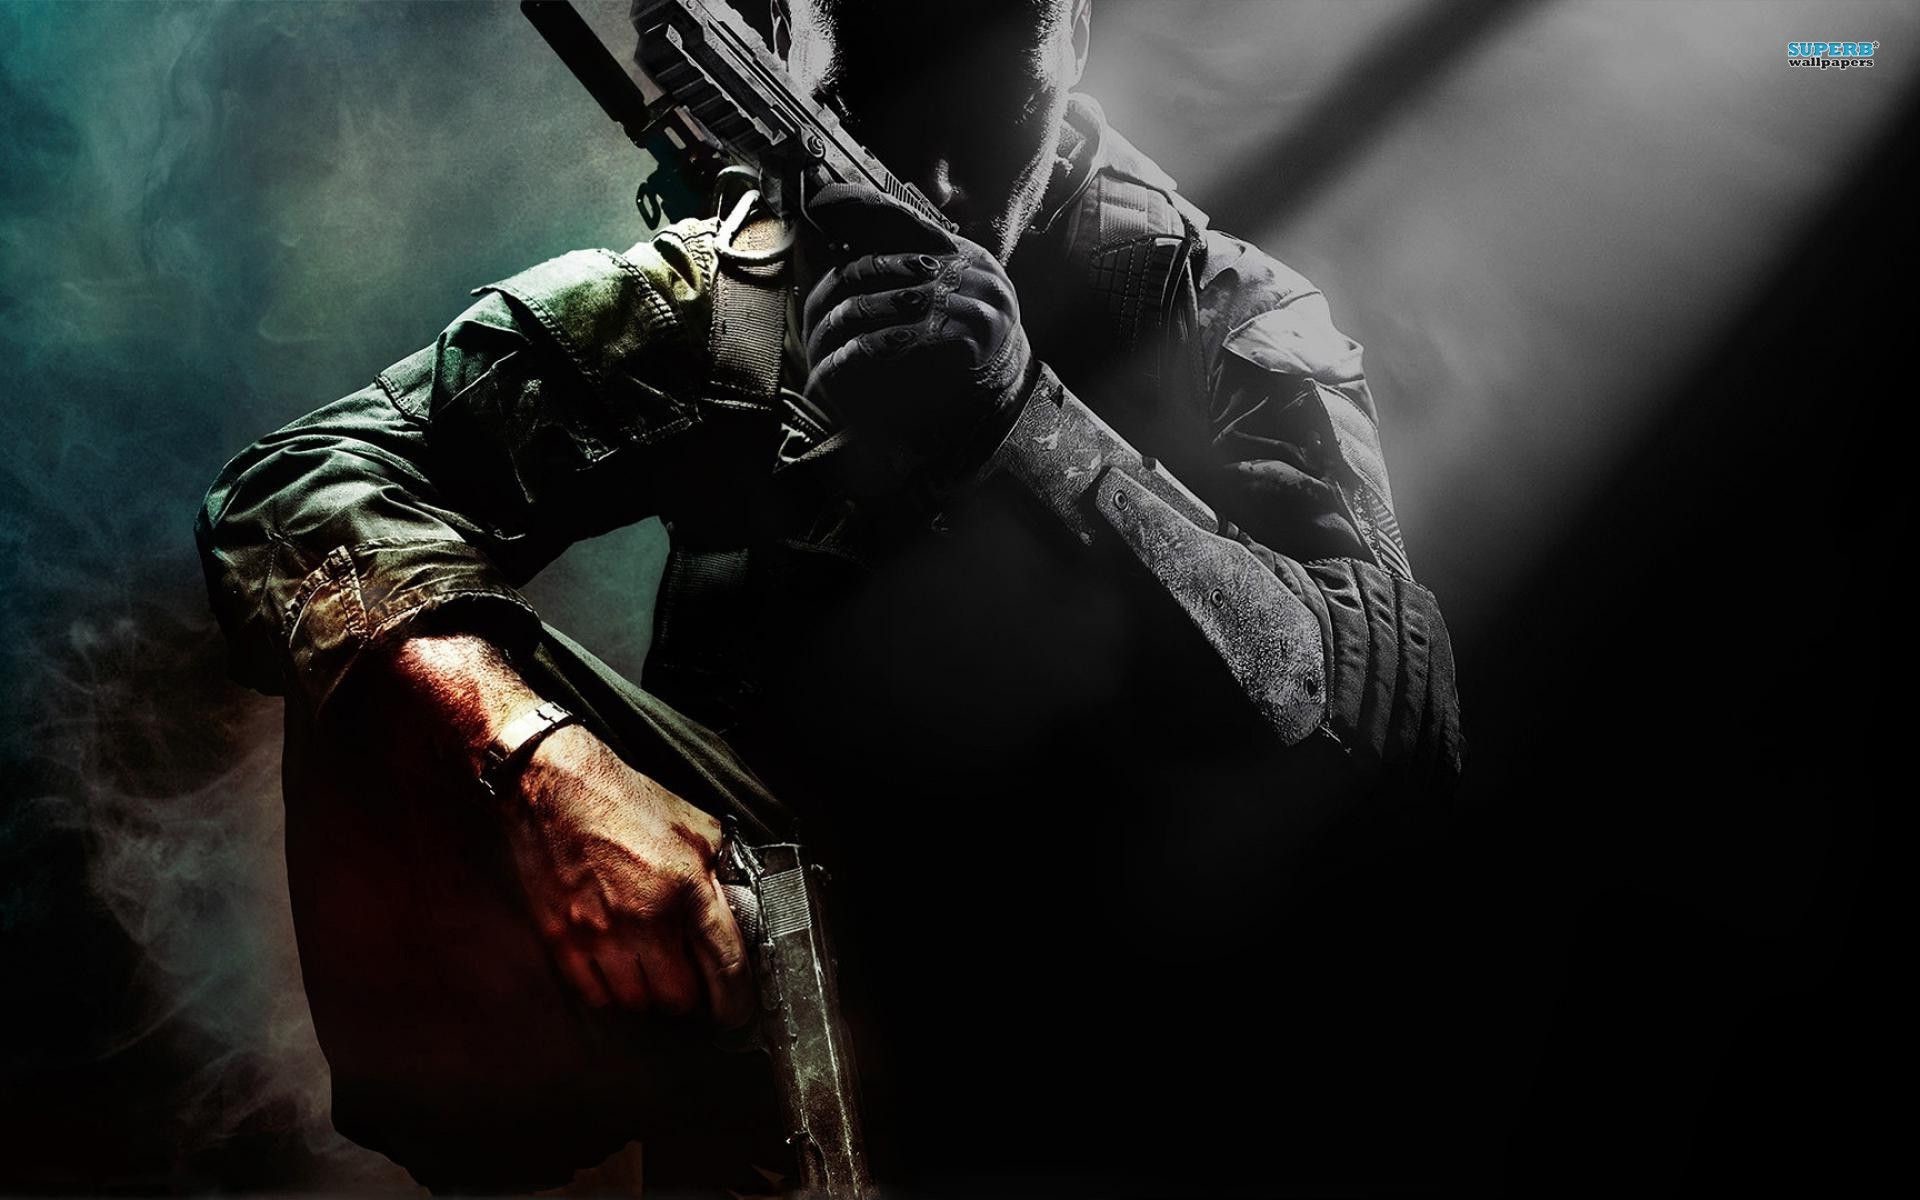 1920x1200 ... call of duty black ops 2 wallpapers on kubipet com ...